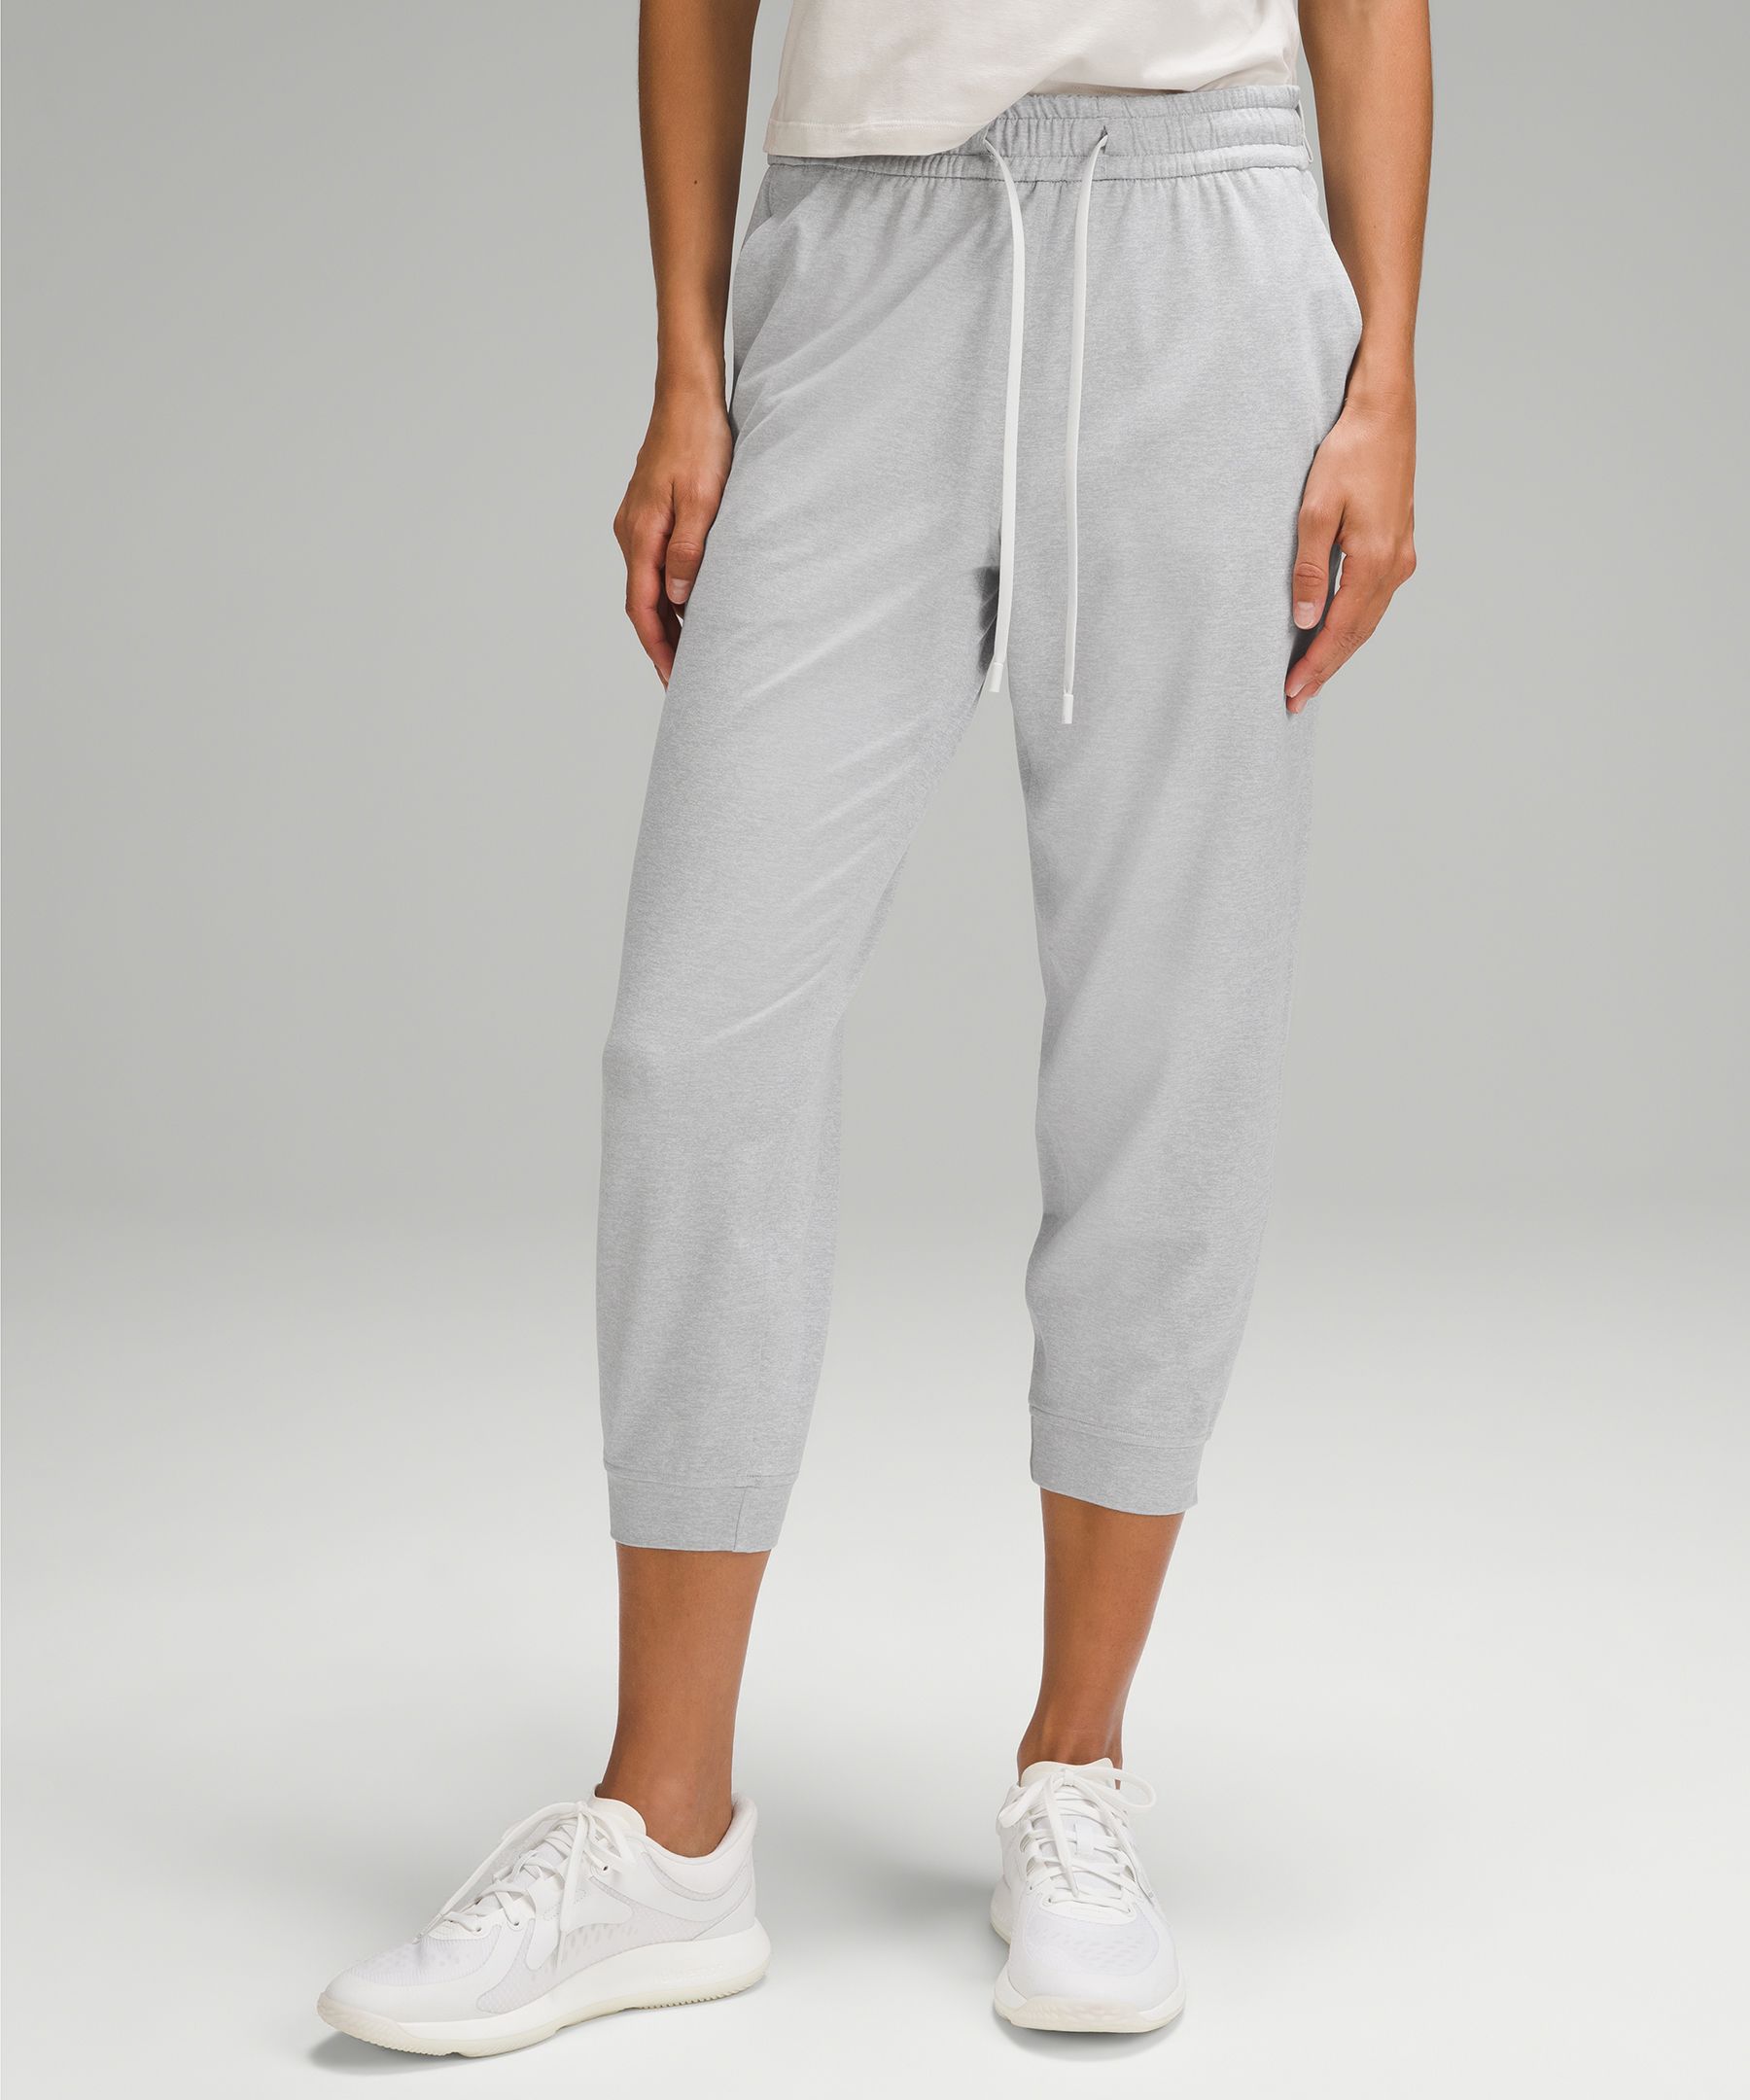 Lululemons soft jersey fit mid rise jogger is the perfect length for t, Lululemon